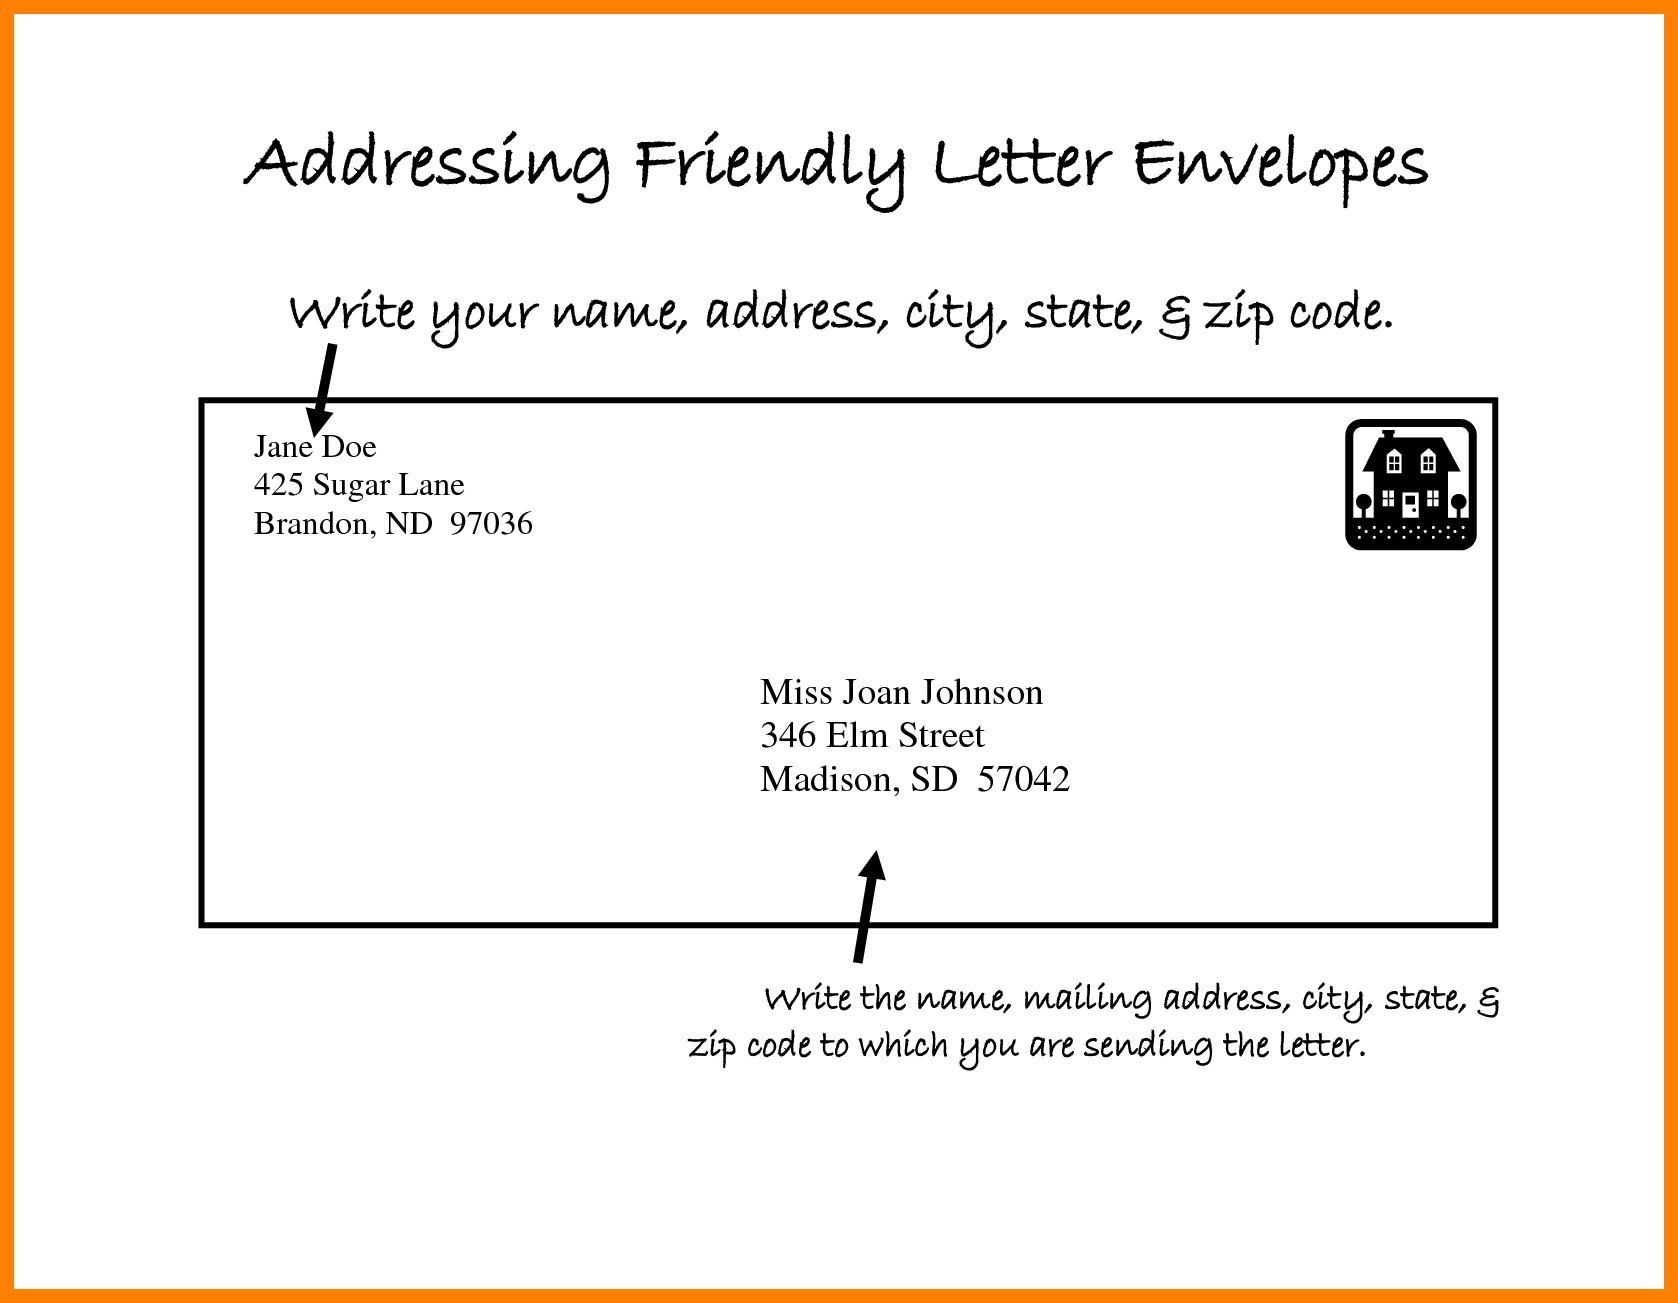 Format To Write A Letter Copy 7 How To Write Address In Letter 